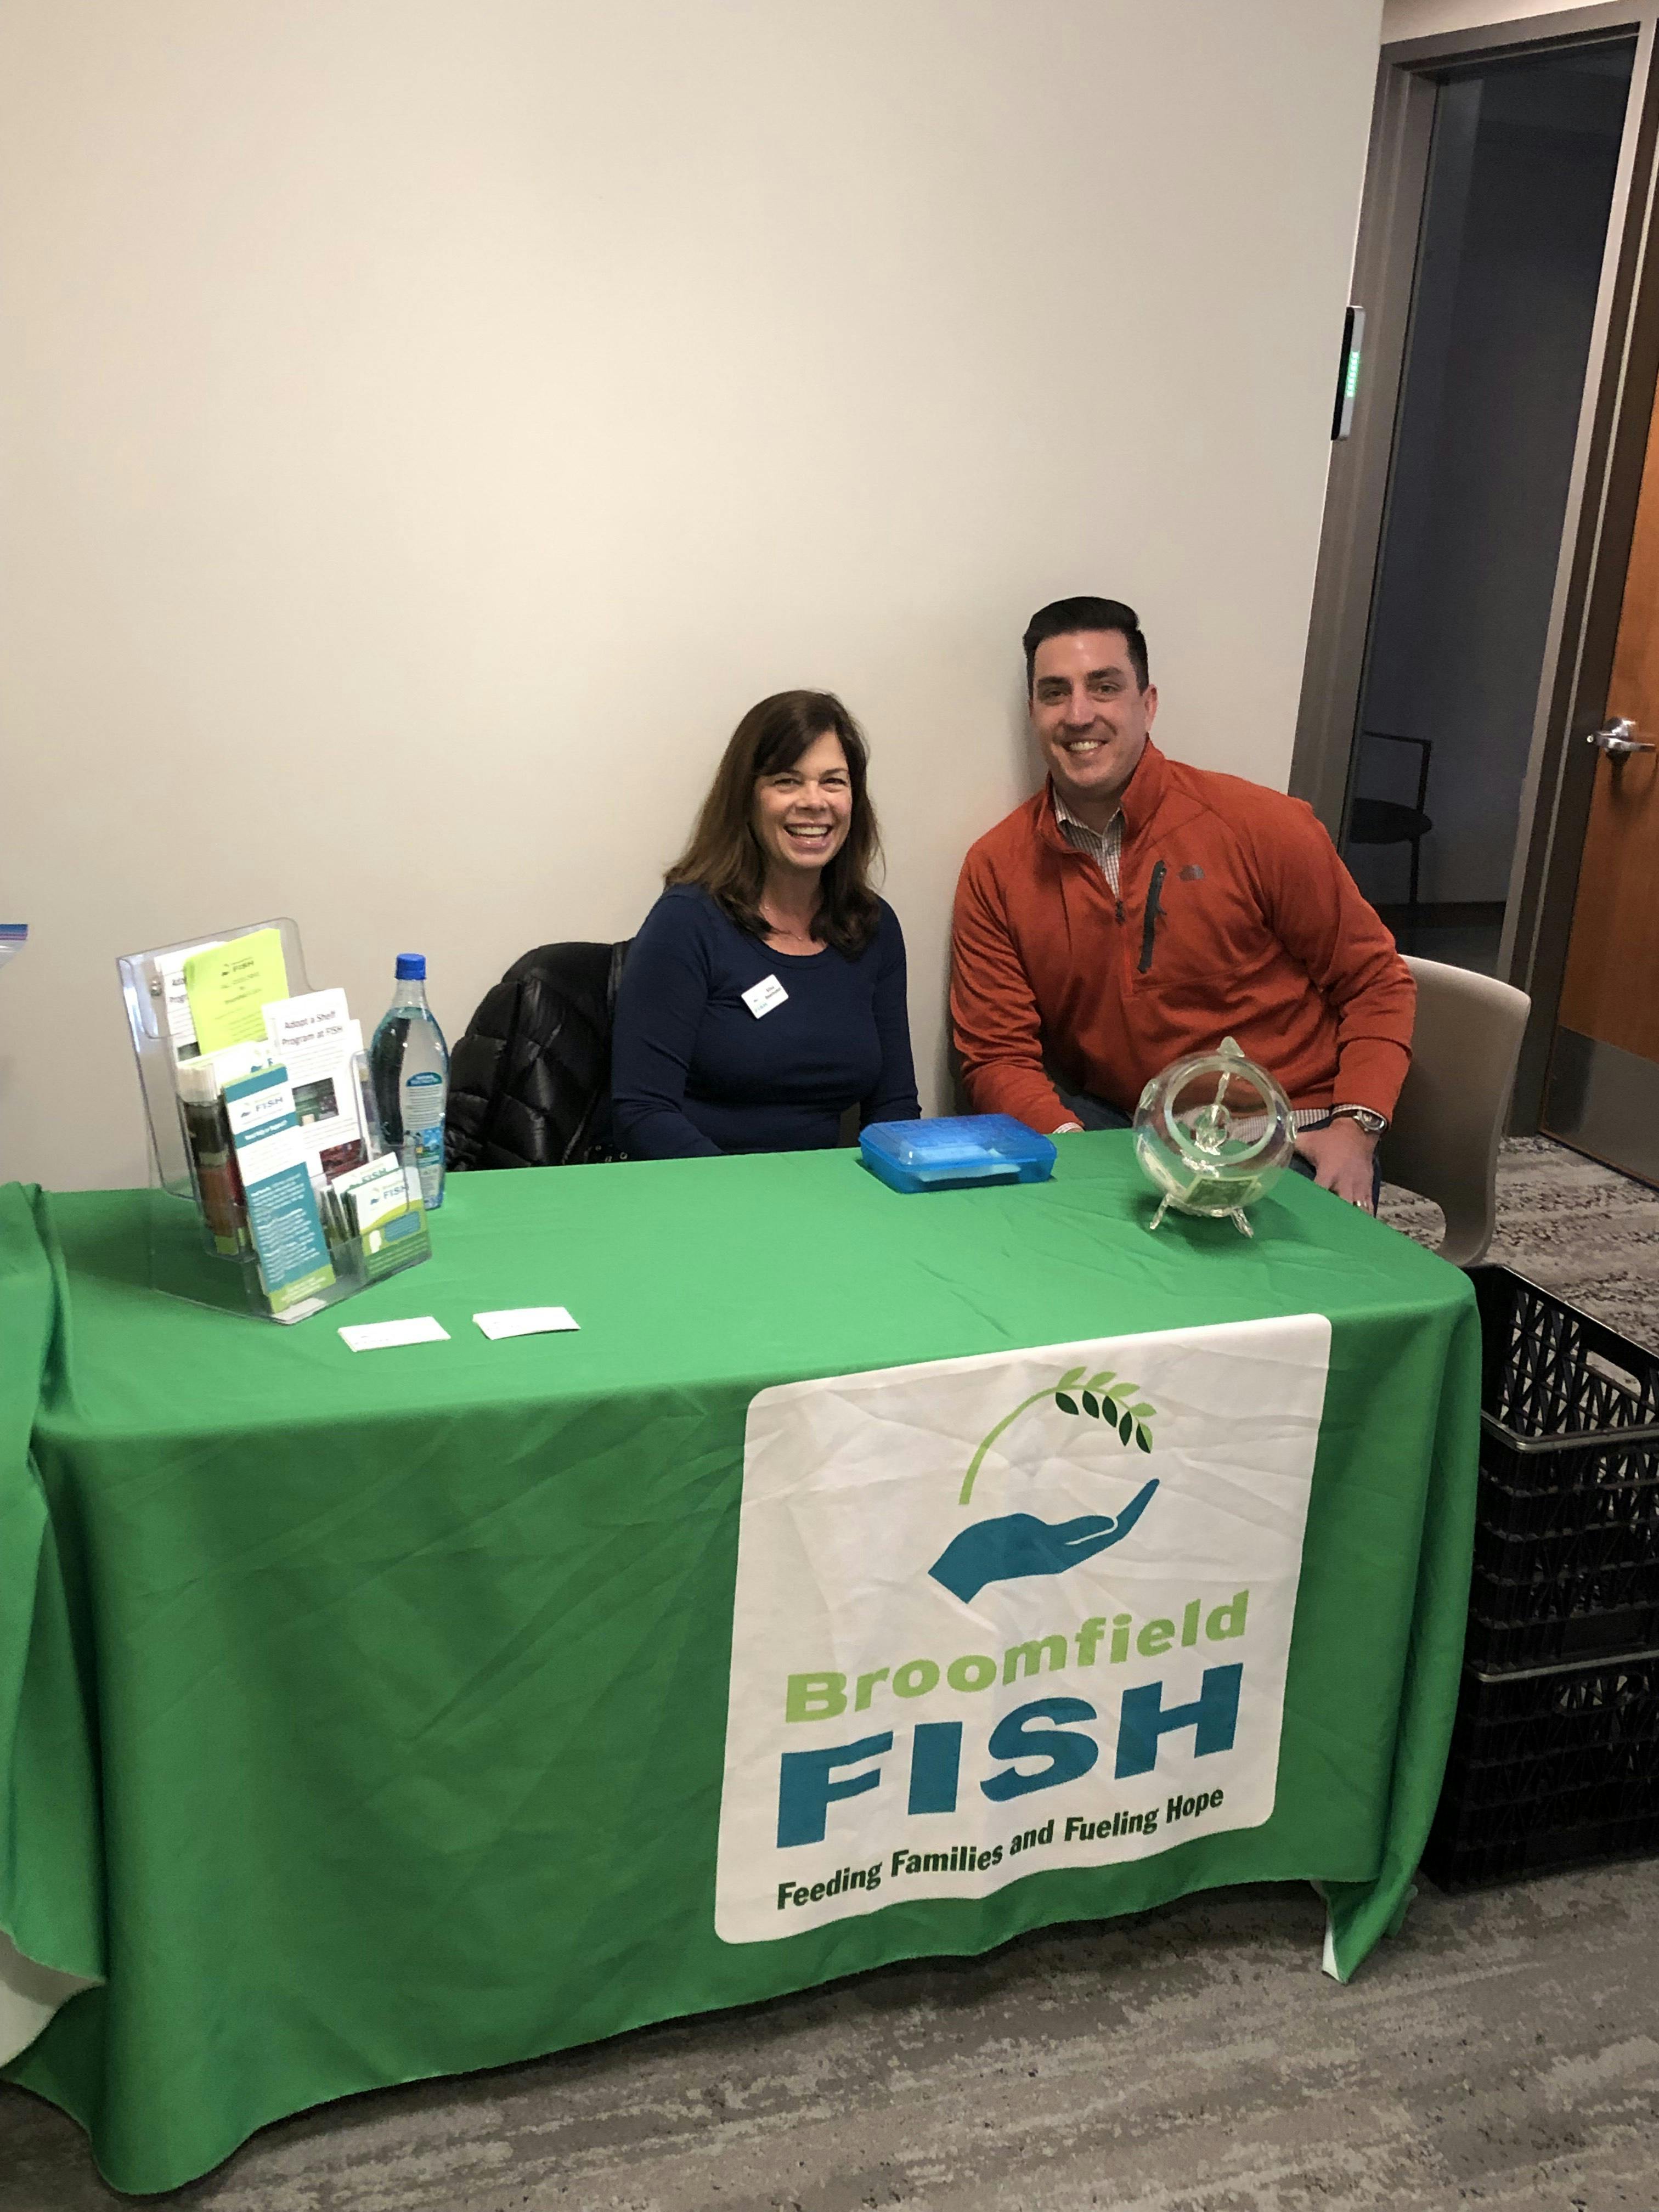 broomfield-fish-at-broomfields-show-the-love-event_47147218591_o.jpg